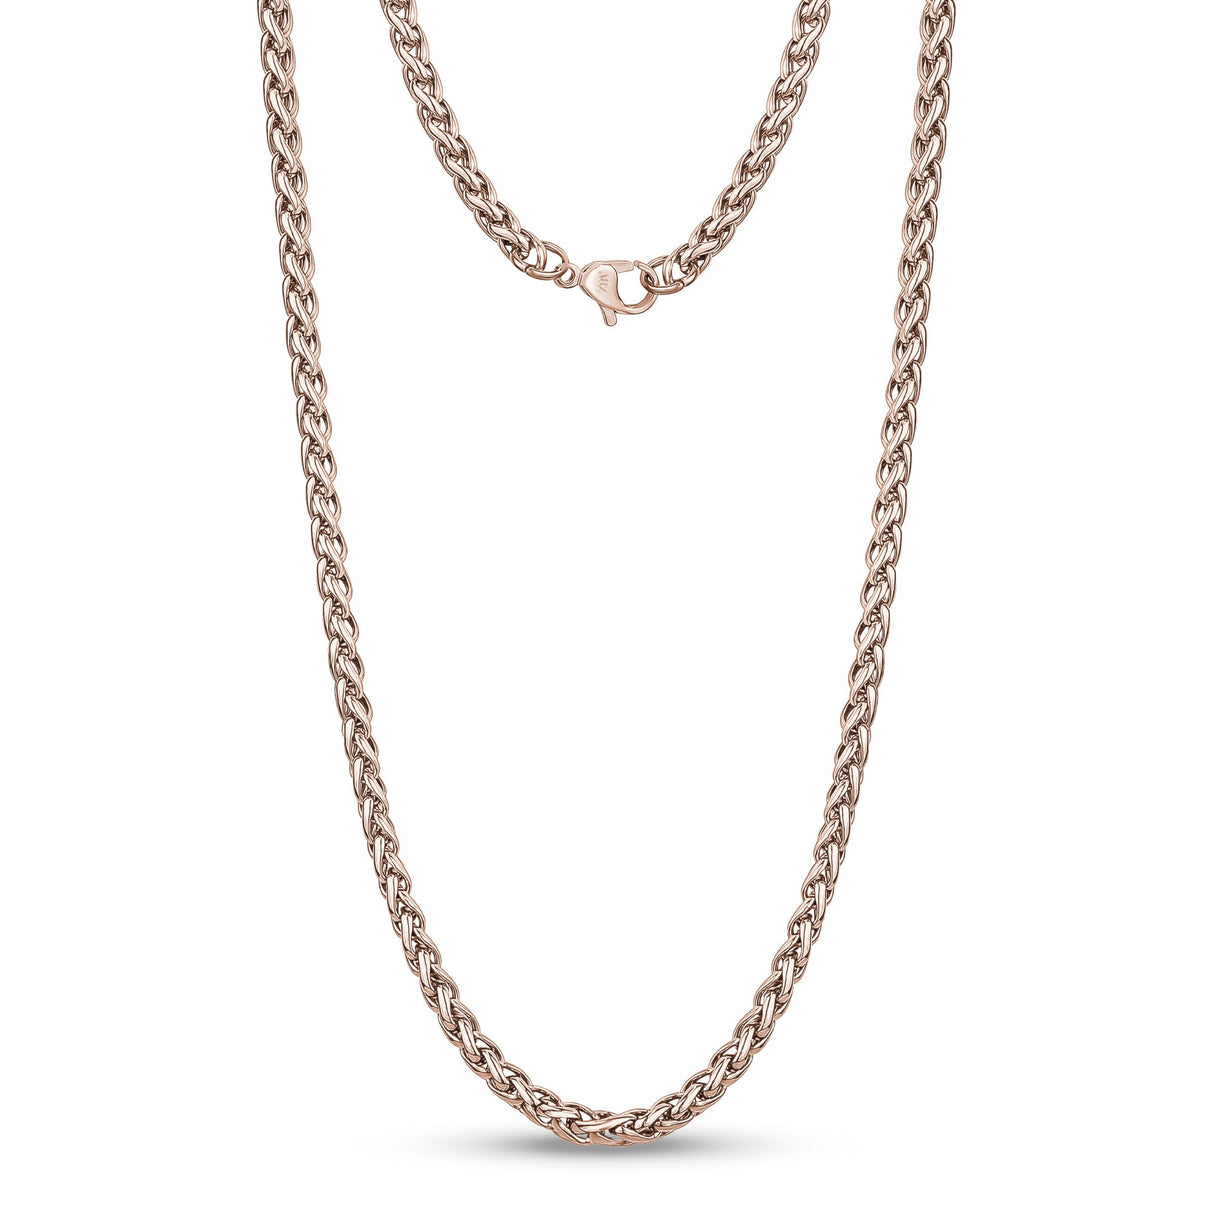 Men Necklace - 4mm Rose Gold Stainless Steel Round Franco Wheat Chain Necklace